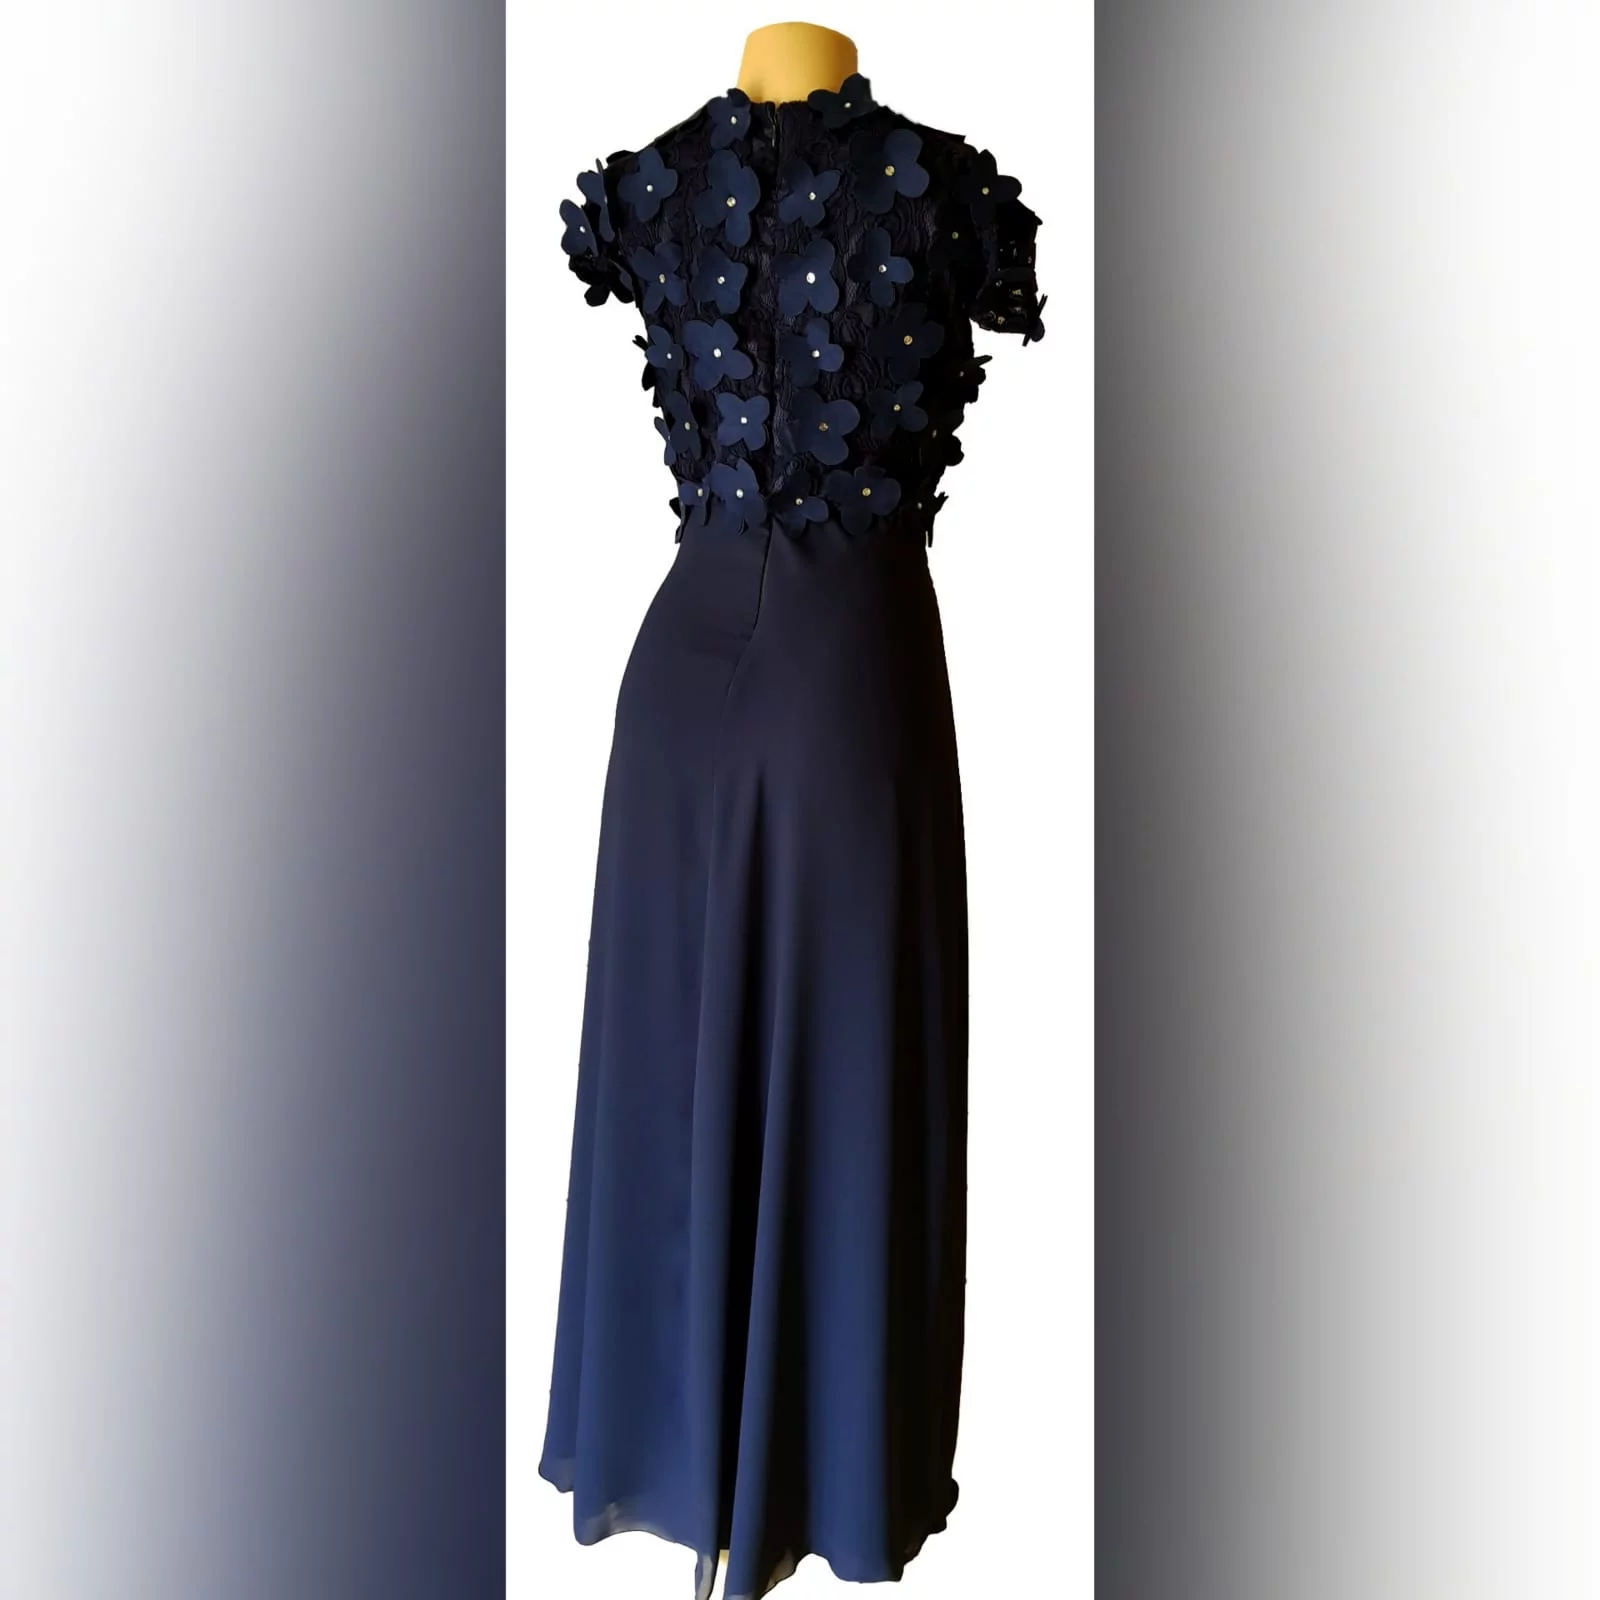 Navy blue long evening dress bodice 4 navy blue long evening dress bodice in lace with 3d suede flowers, detailed with silver beads.